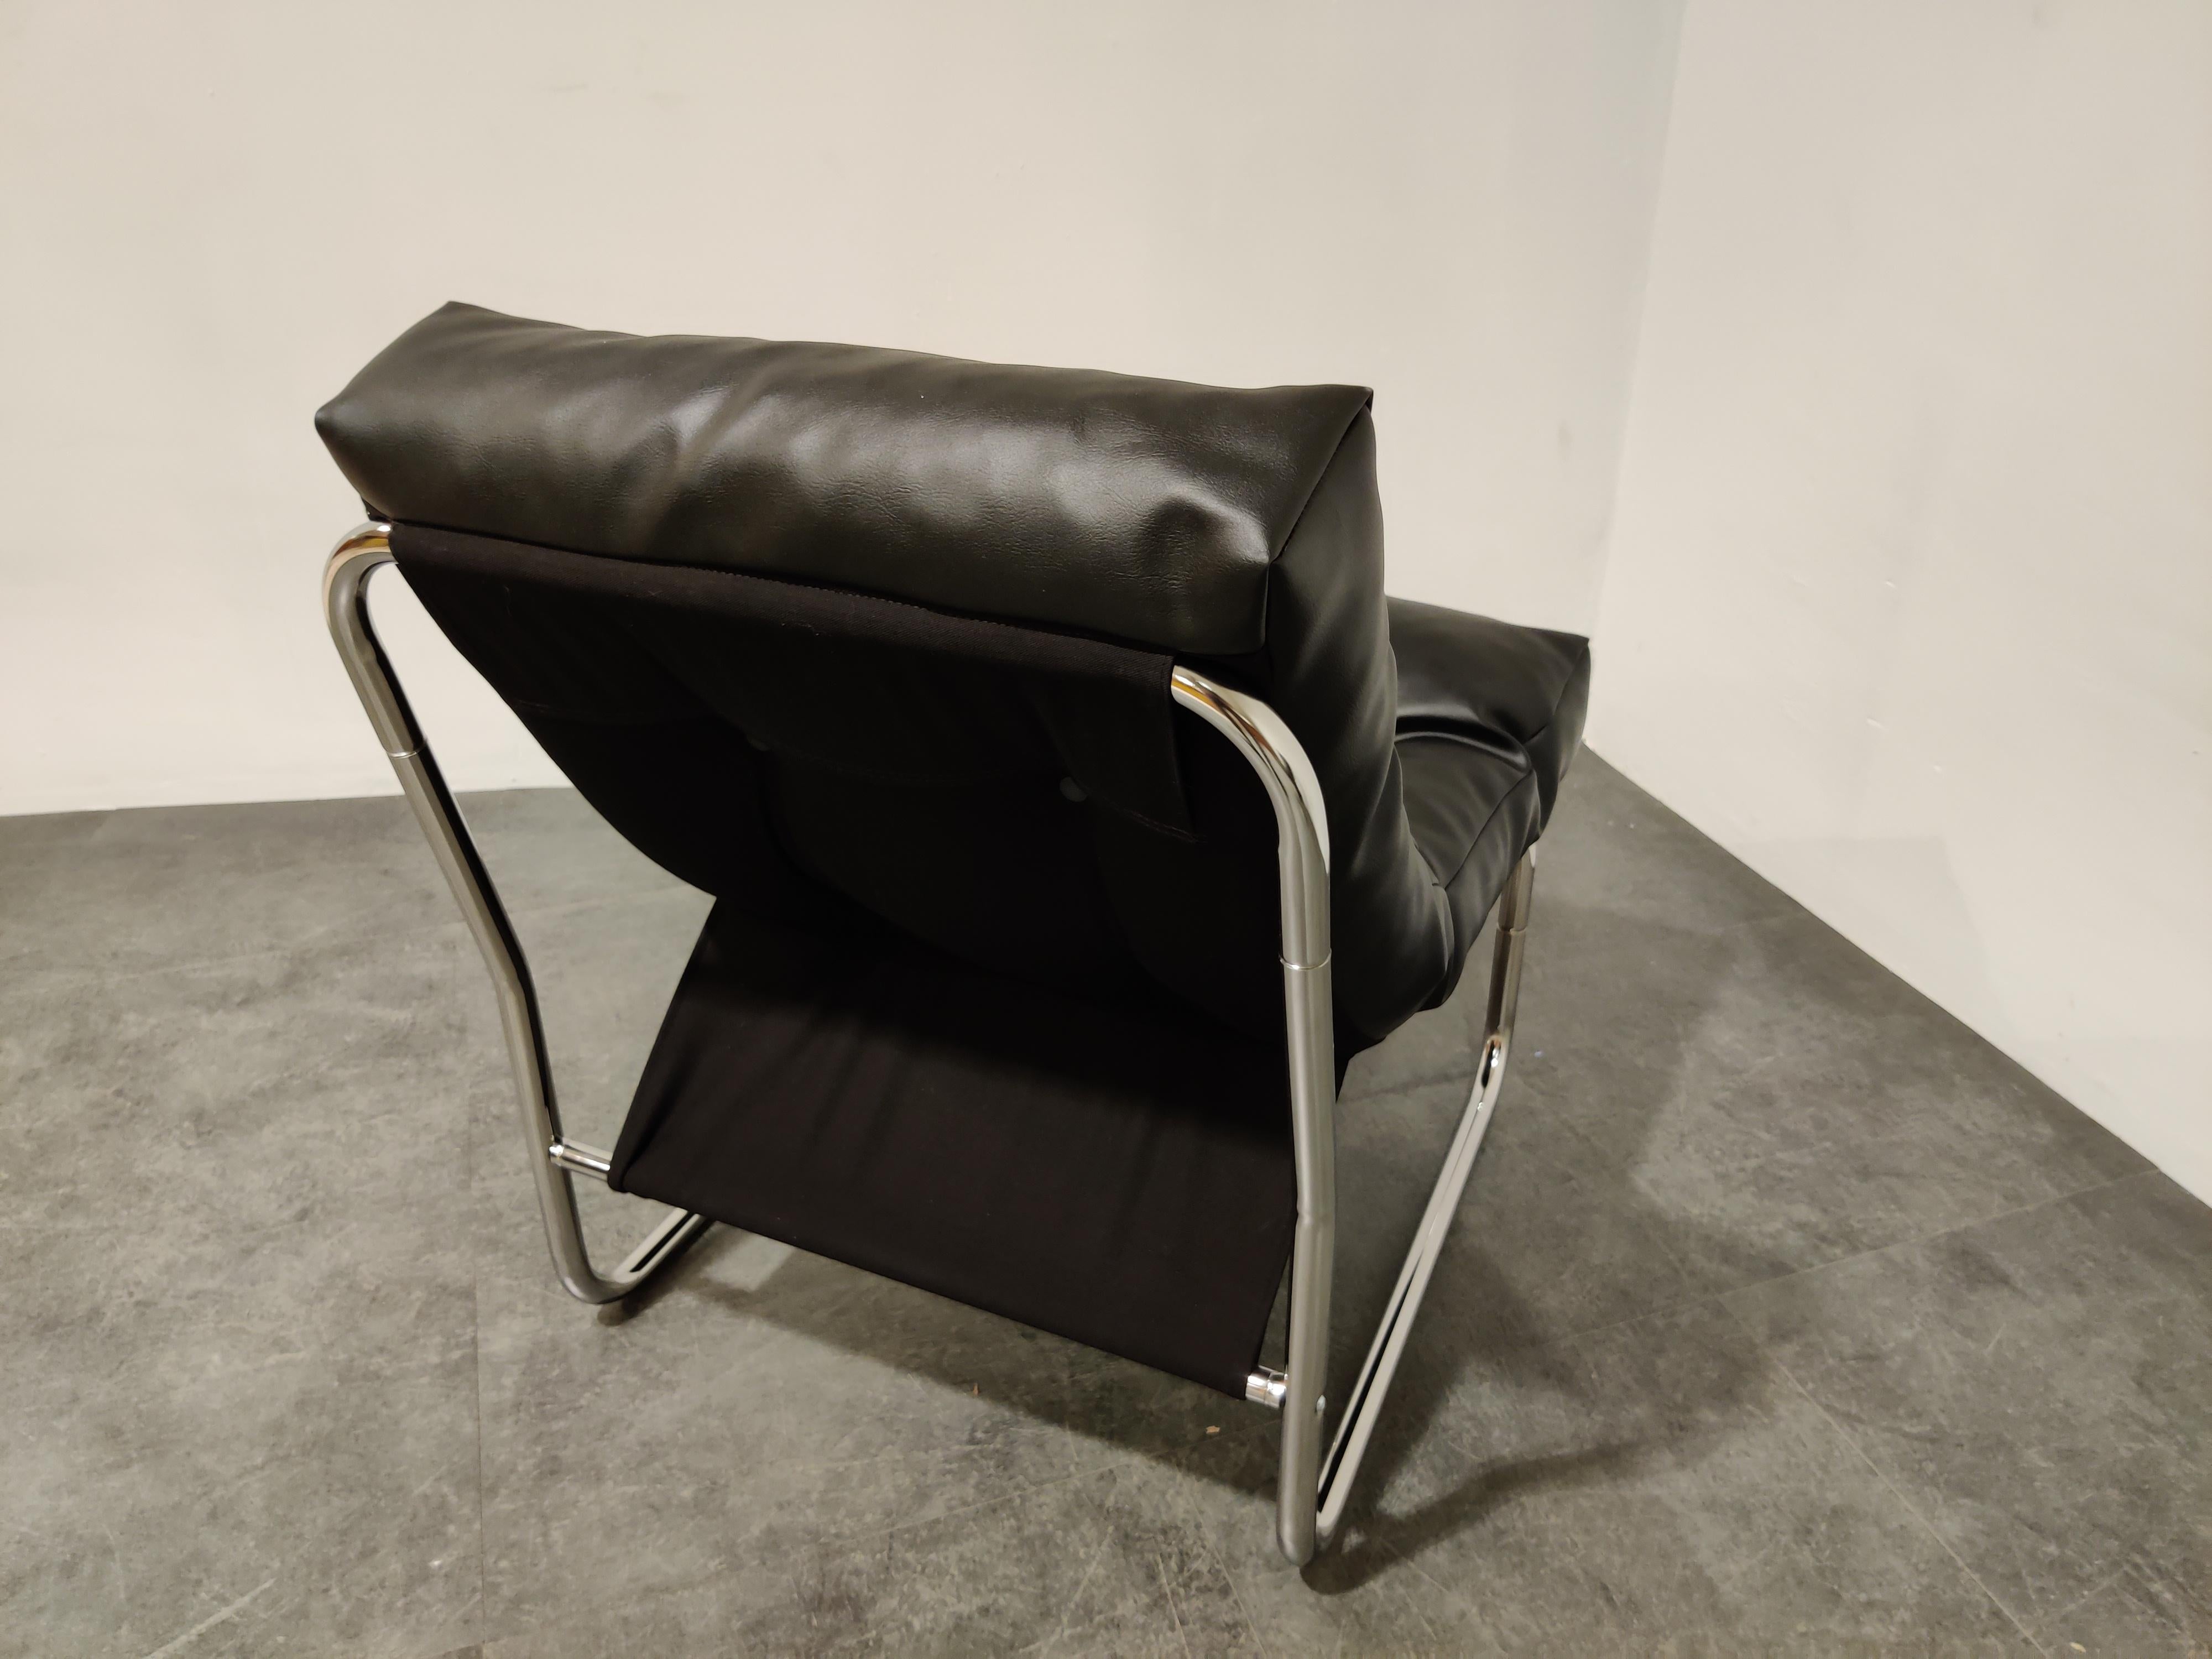 Vintage lounge chairs by famous Ikea designer Gillis Lundgren.

Made of a tubular steel frame with black faux leather upholstery. 

Very comfortable.

Perfect condition.

1970s, Sweden

Dimensions:
Height 80cm/31.49